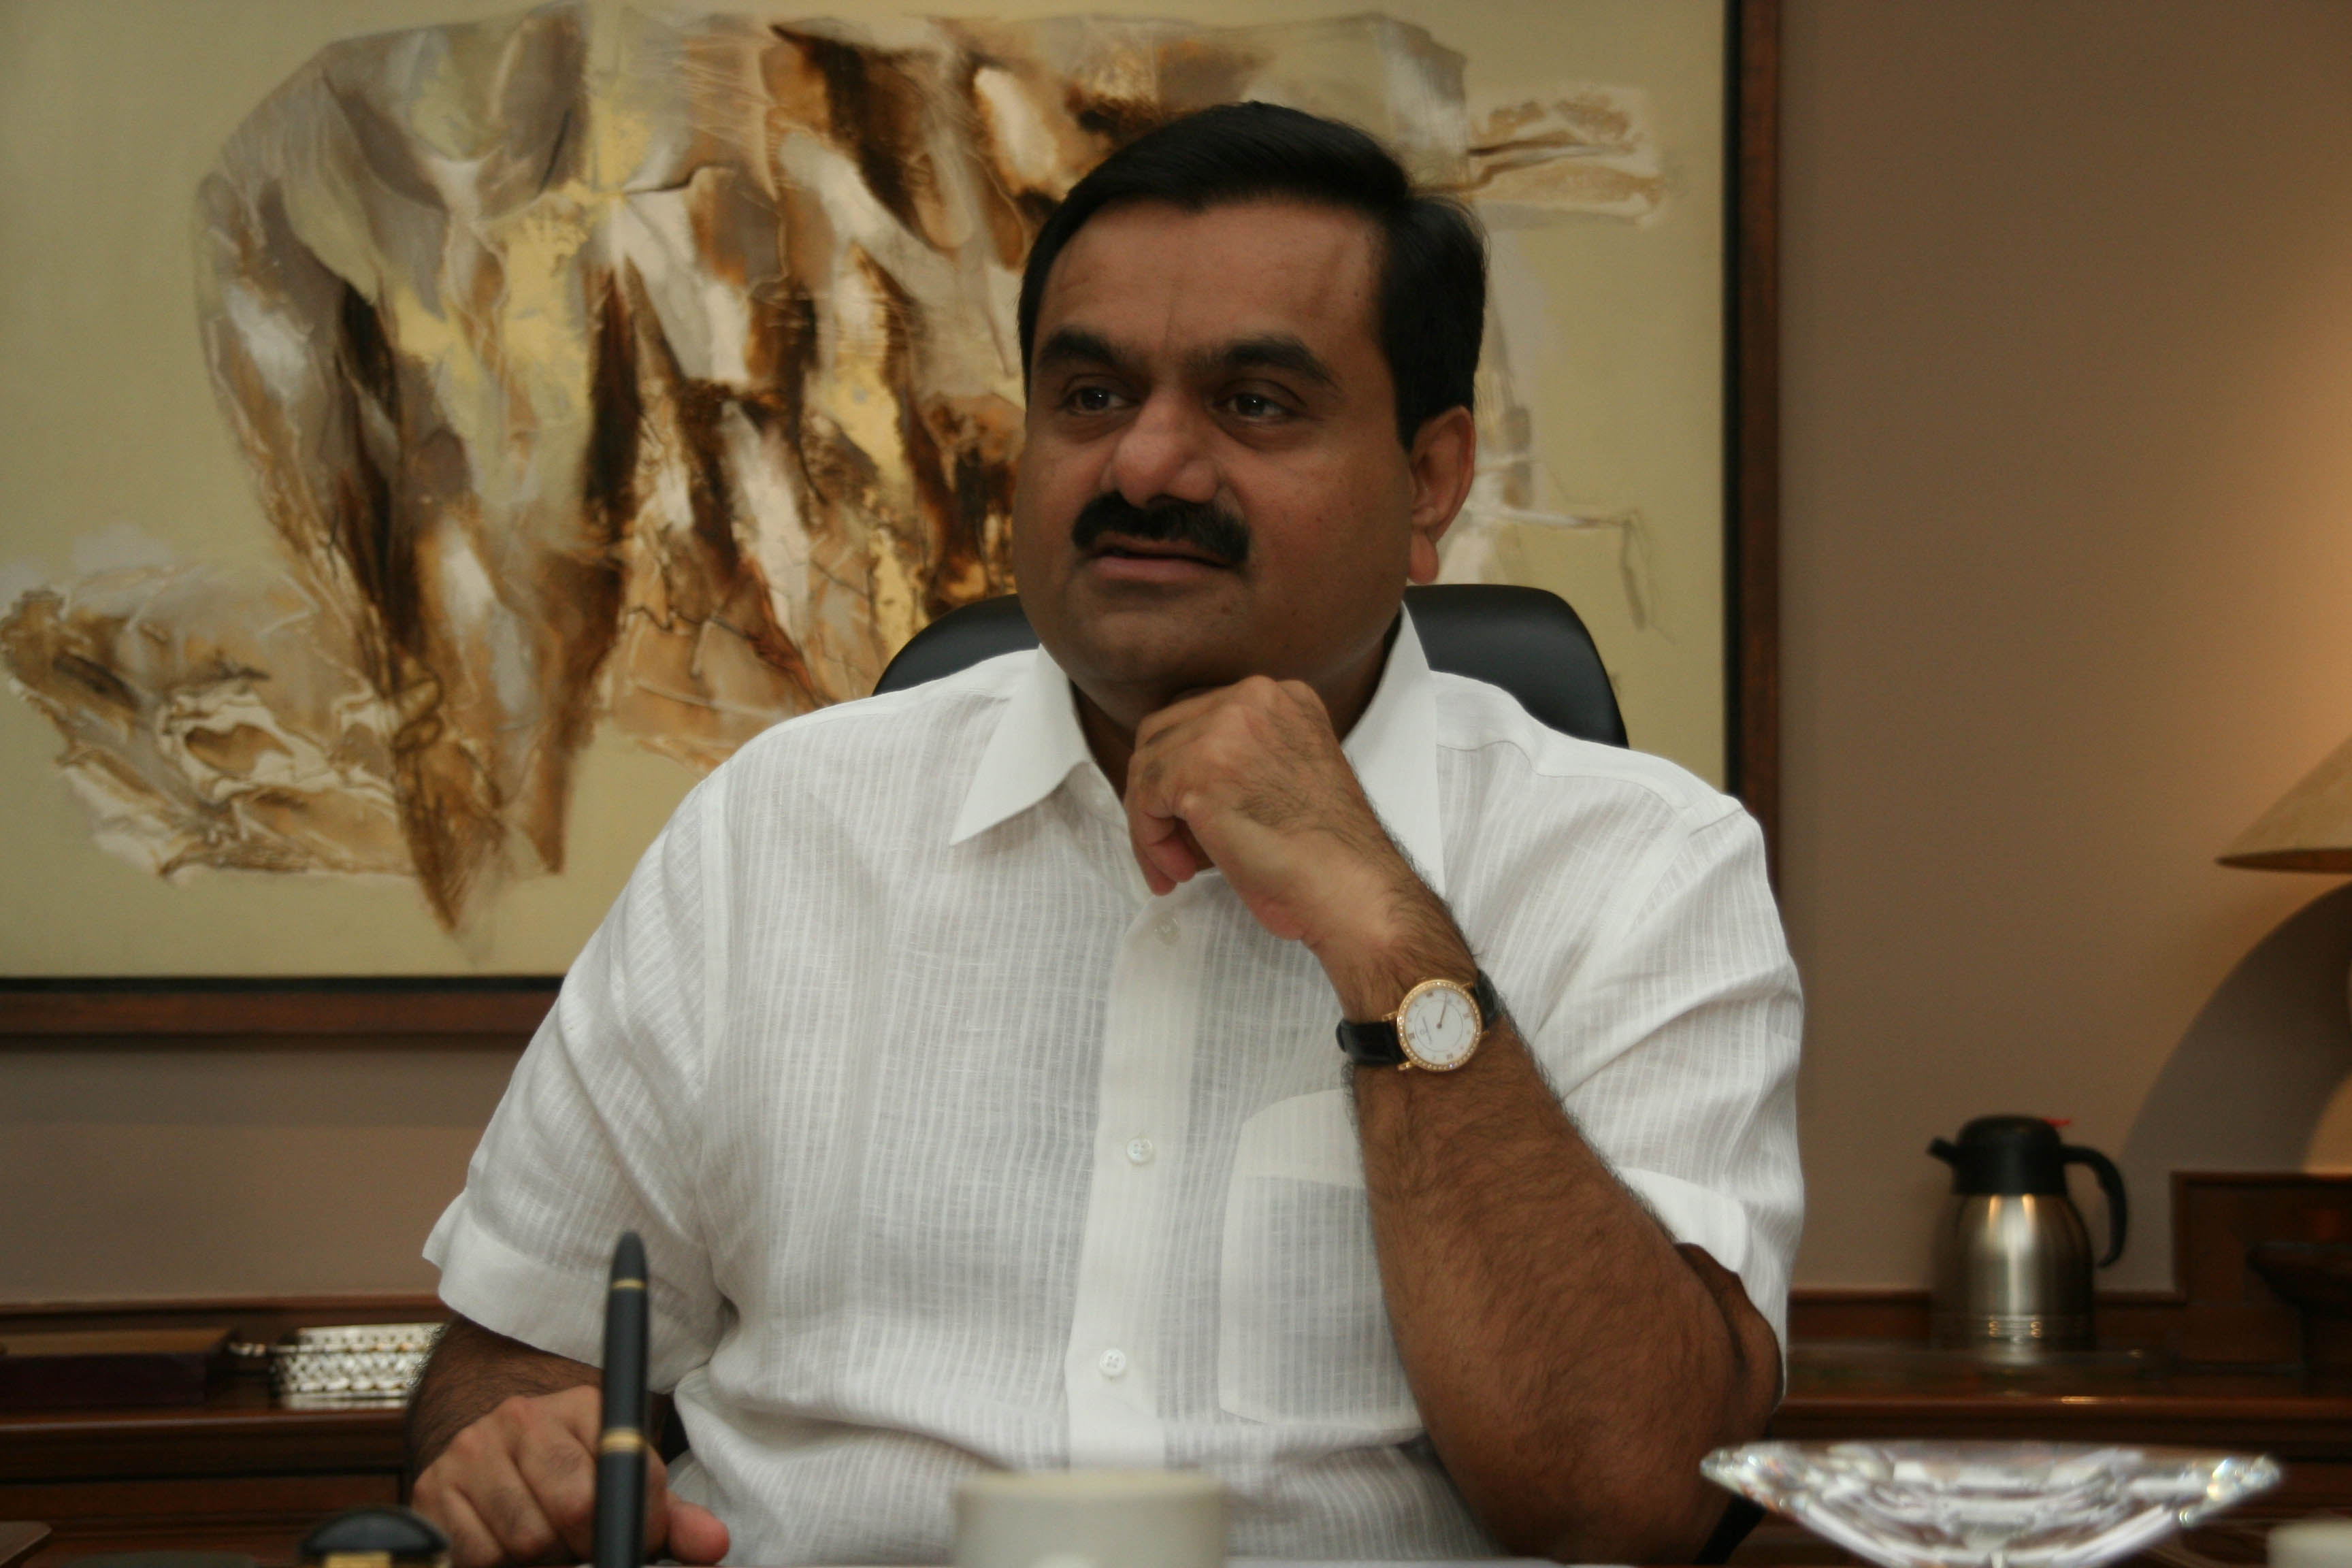 Chairman Of Adani Group Gautam Adani poses for a profile shoot during an interview on Jlu on July 19, 2010 in Ahmedabad, India. (Ramesh Dave—Mint/Getty Images)